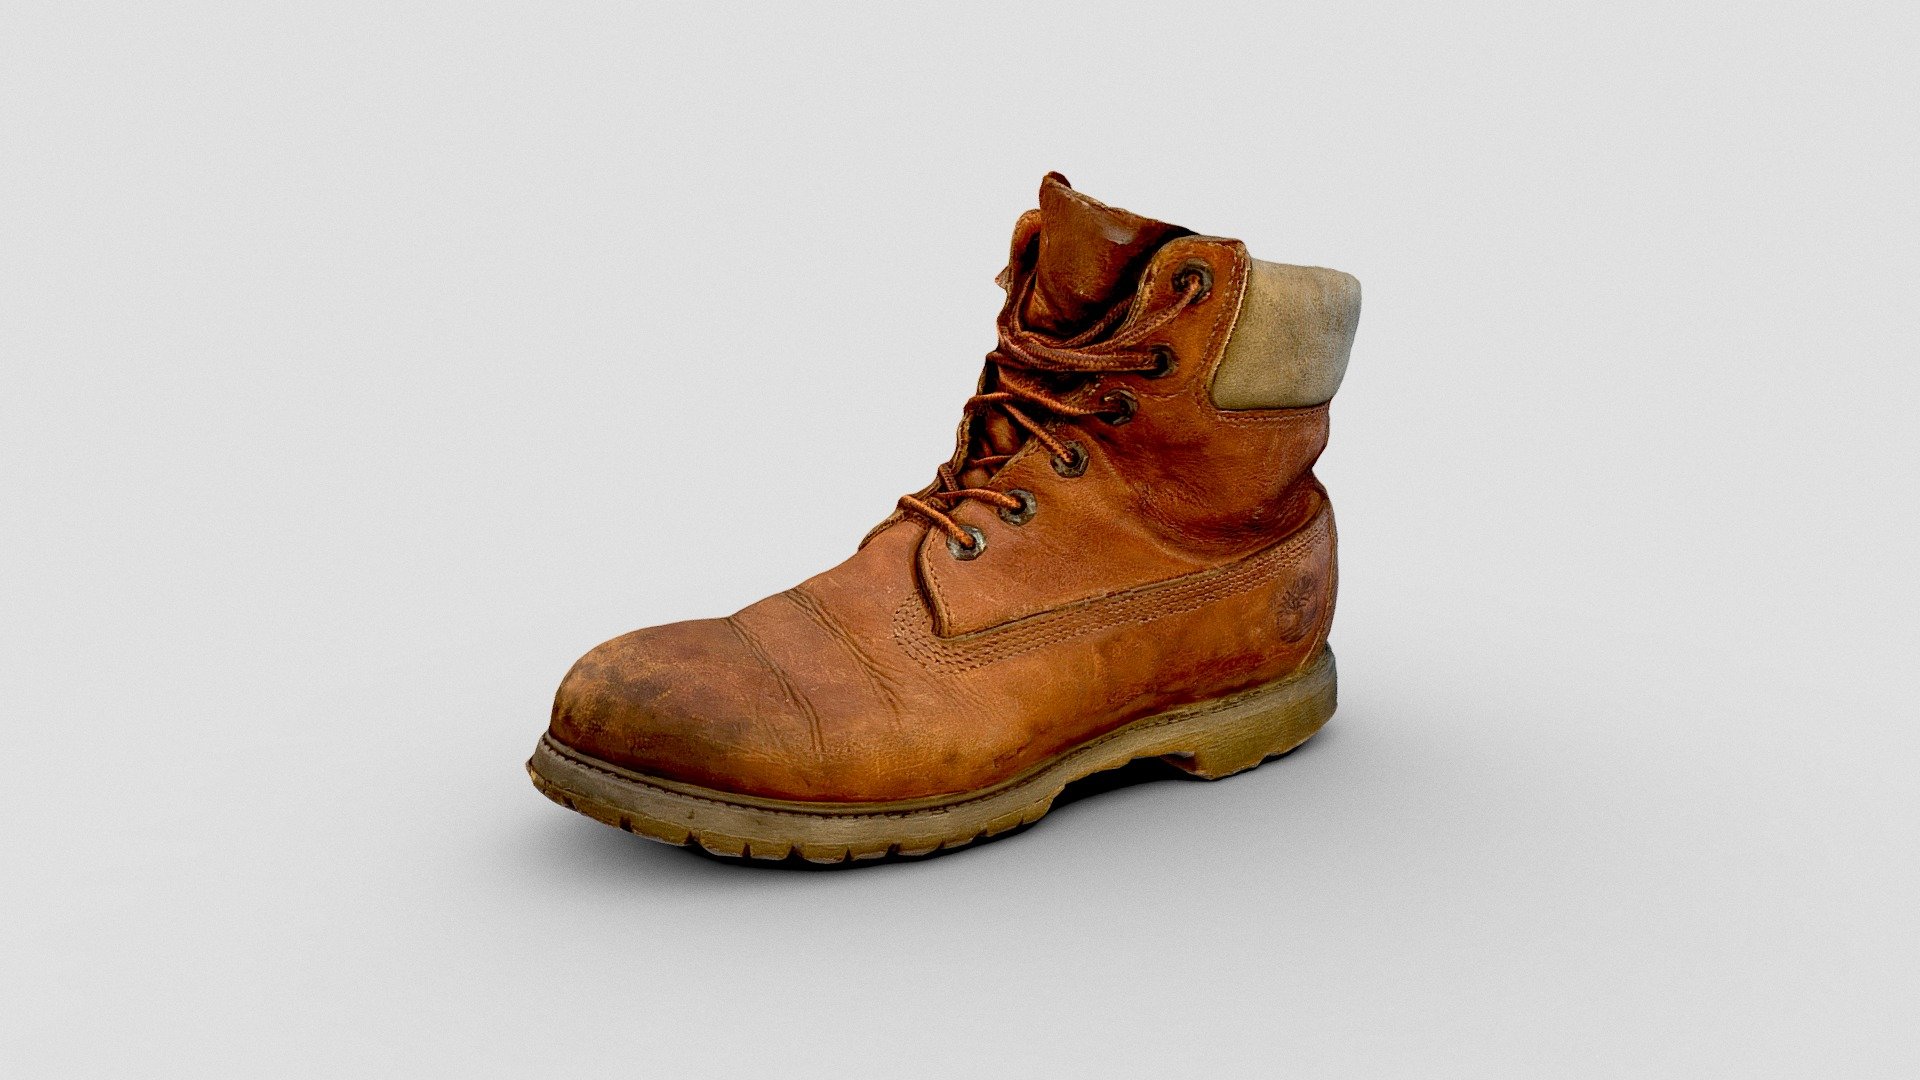 Old Timberland boot - Buy Royalty Free 